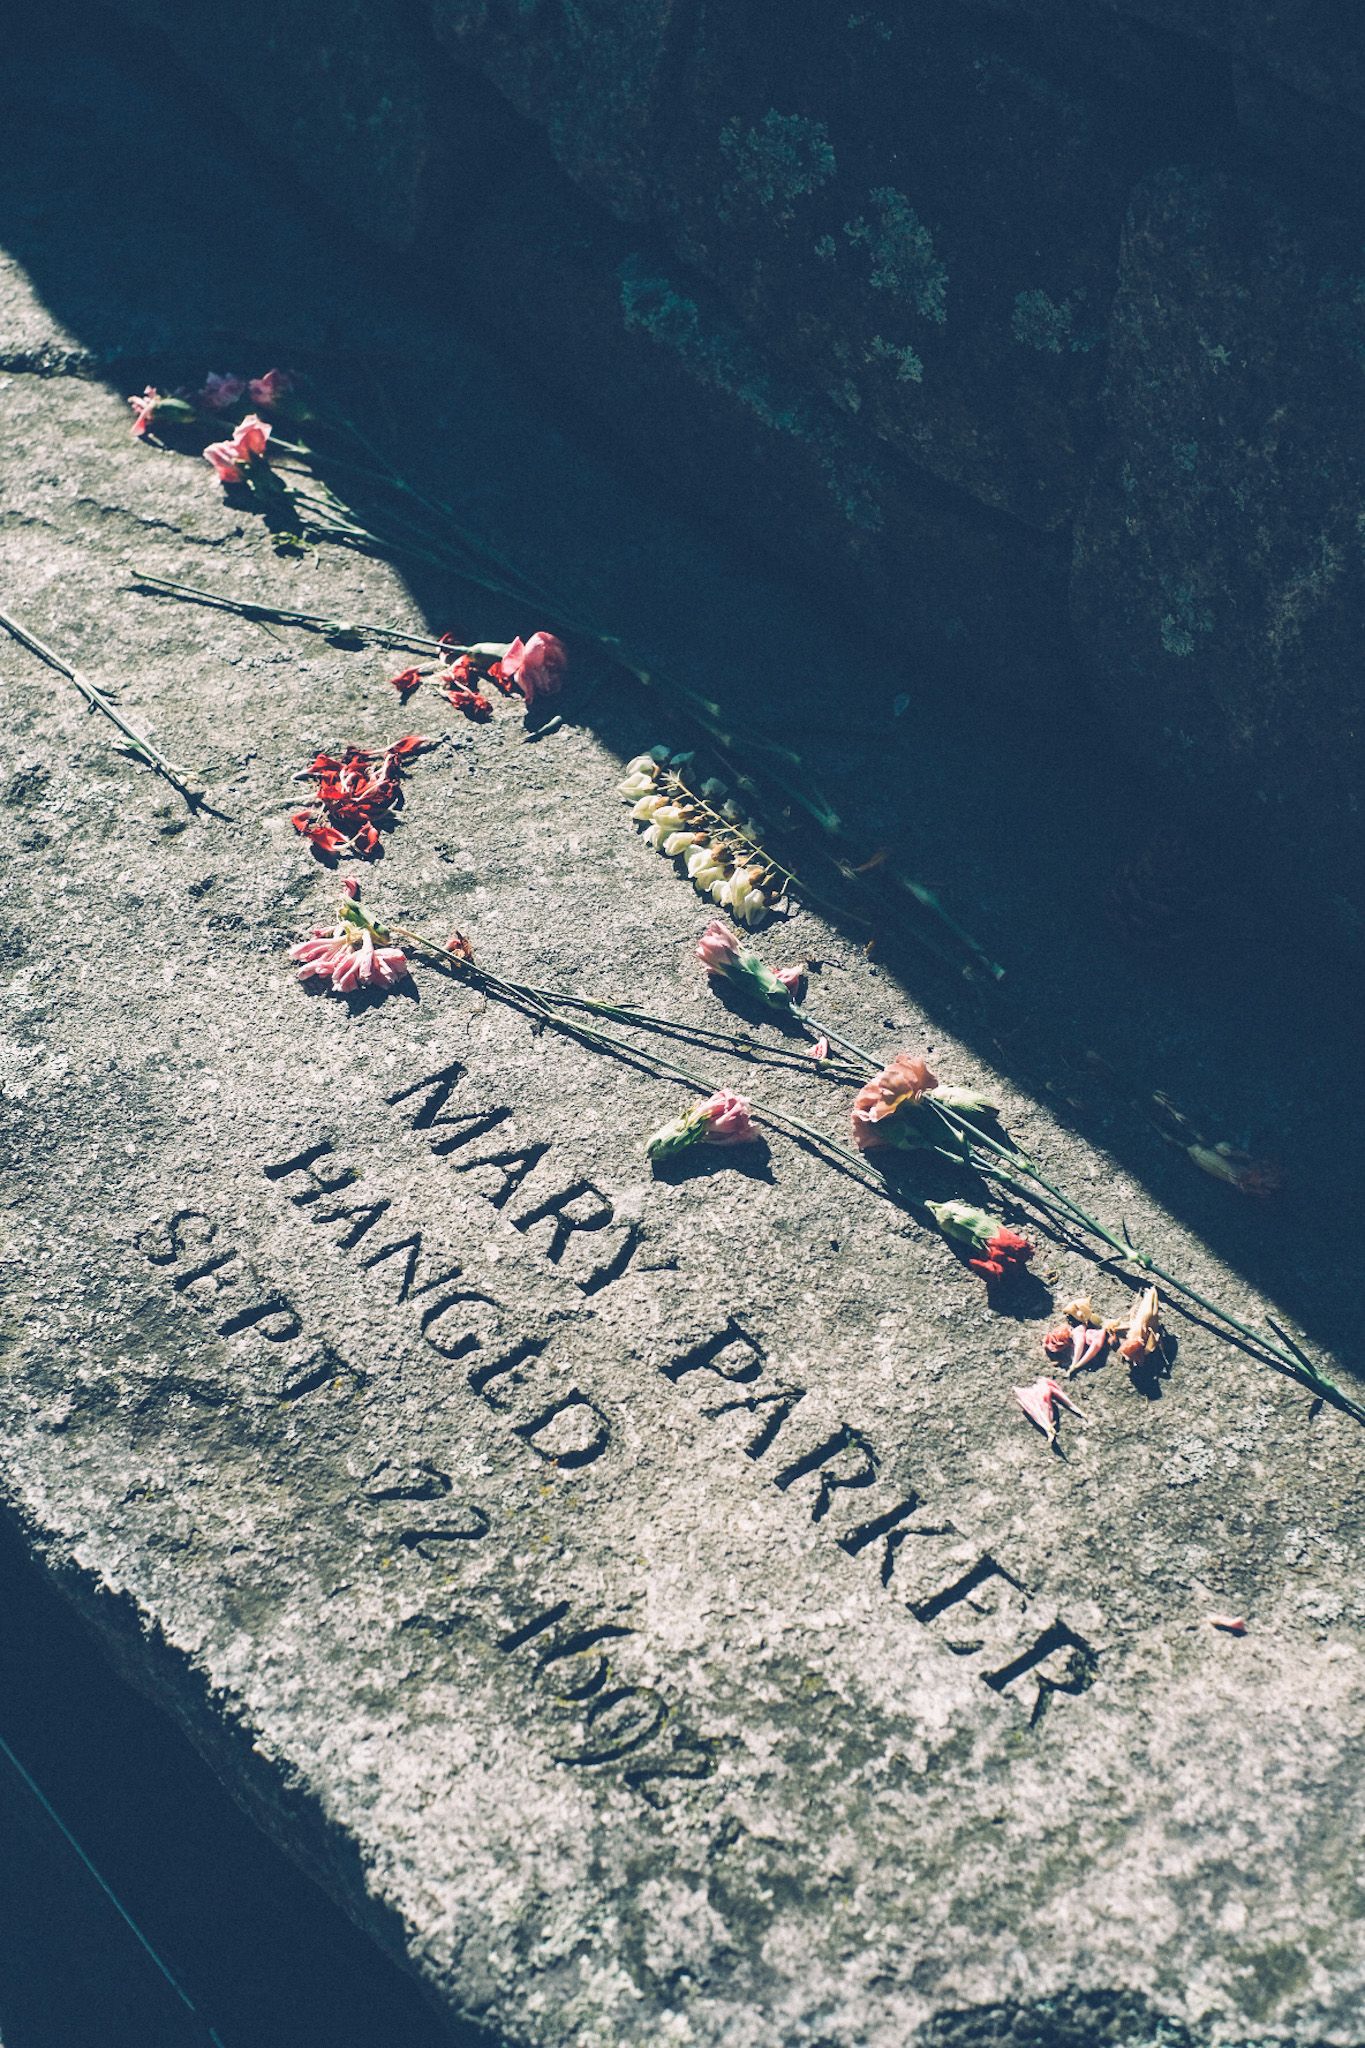 A gravestone in the harsh sunlight reads “Mary Parker / Hanged” with flowers scattered around it.